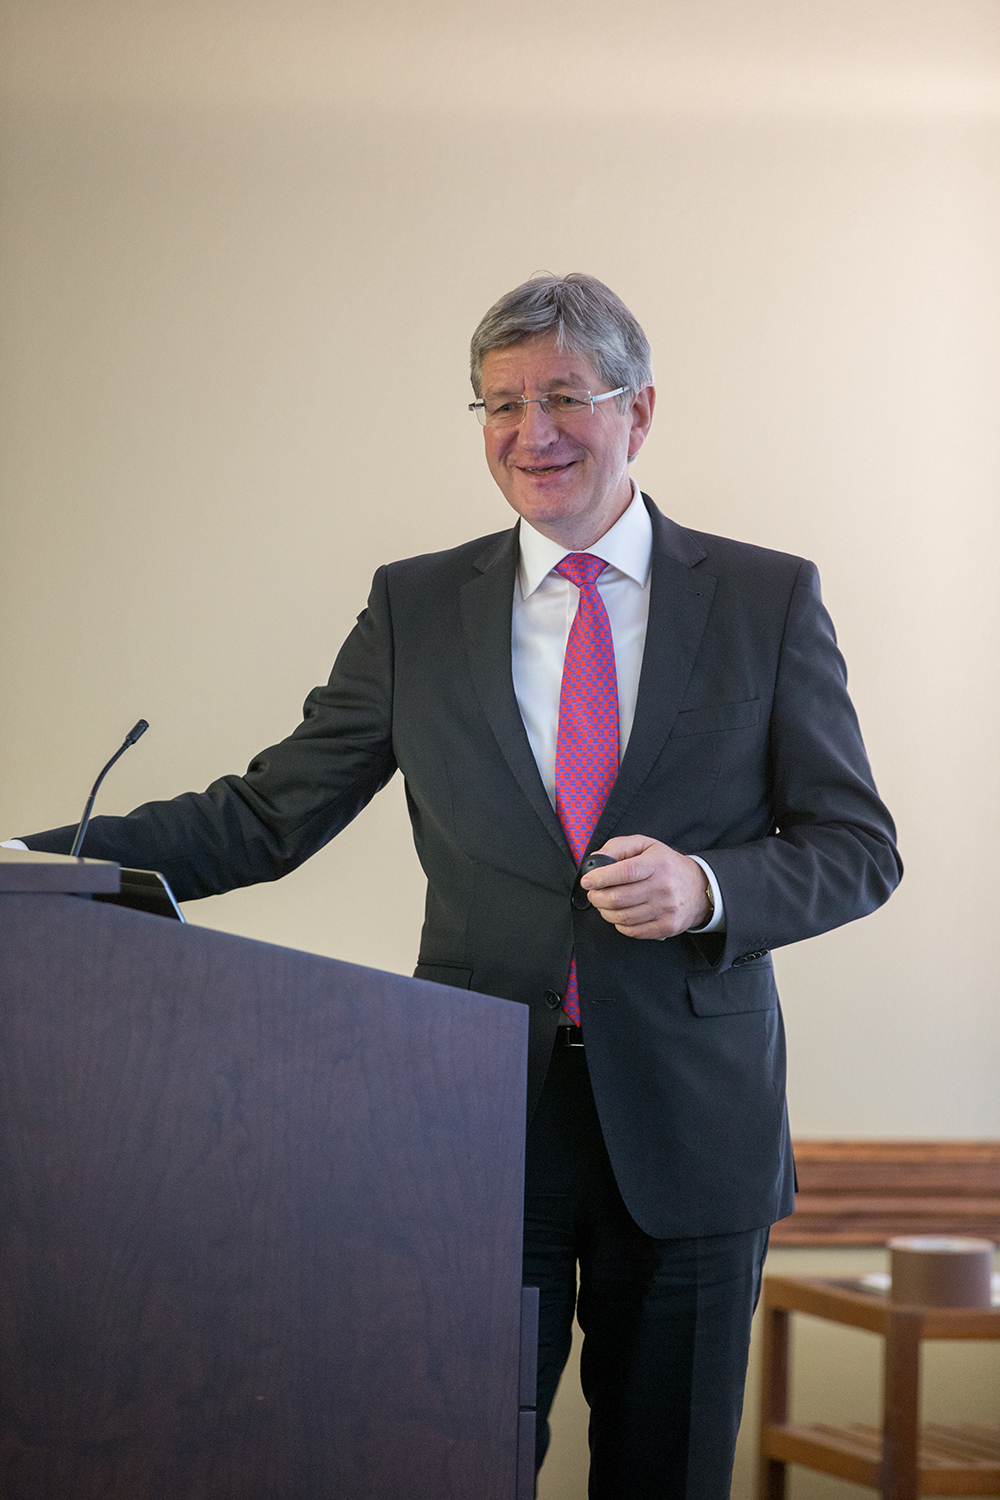 Prof. Dr.-Ing. Wolfgang Marquardt, Chairman of the Board of Directors of Forschungszentrum Jülich, delivers the Texas A&M Energy Institute's 1st Distinguished Lecture in Energy.